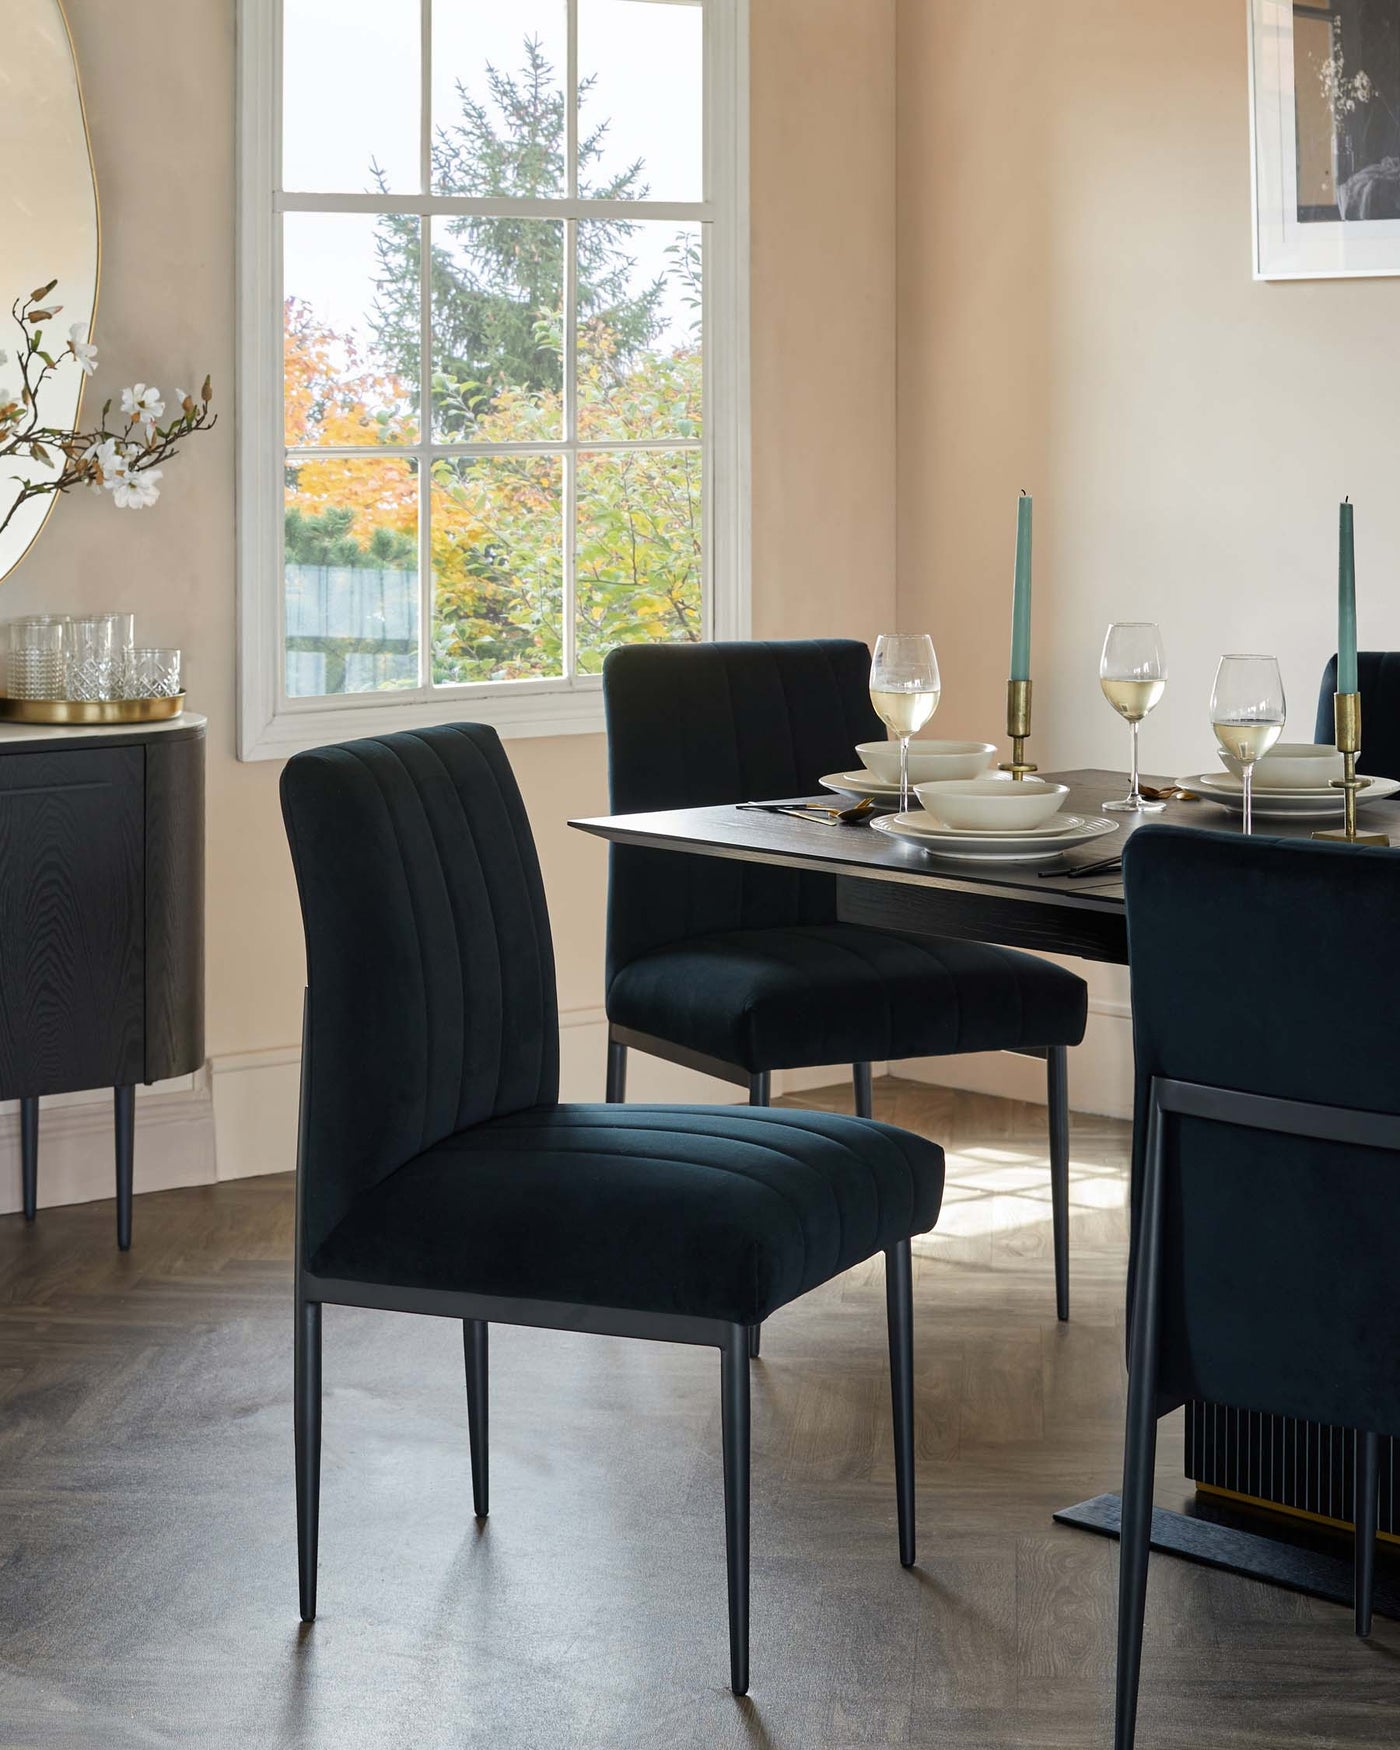 Elegant dining room furniture set featuring a modern rectangular black table and four plush velvet-upholstered chairs with vertical channel stitching and slim black metal legs. A coordinating dark wood sideboard with subtle geometric detailing and metal accents completes the sophisticated ensemble.